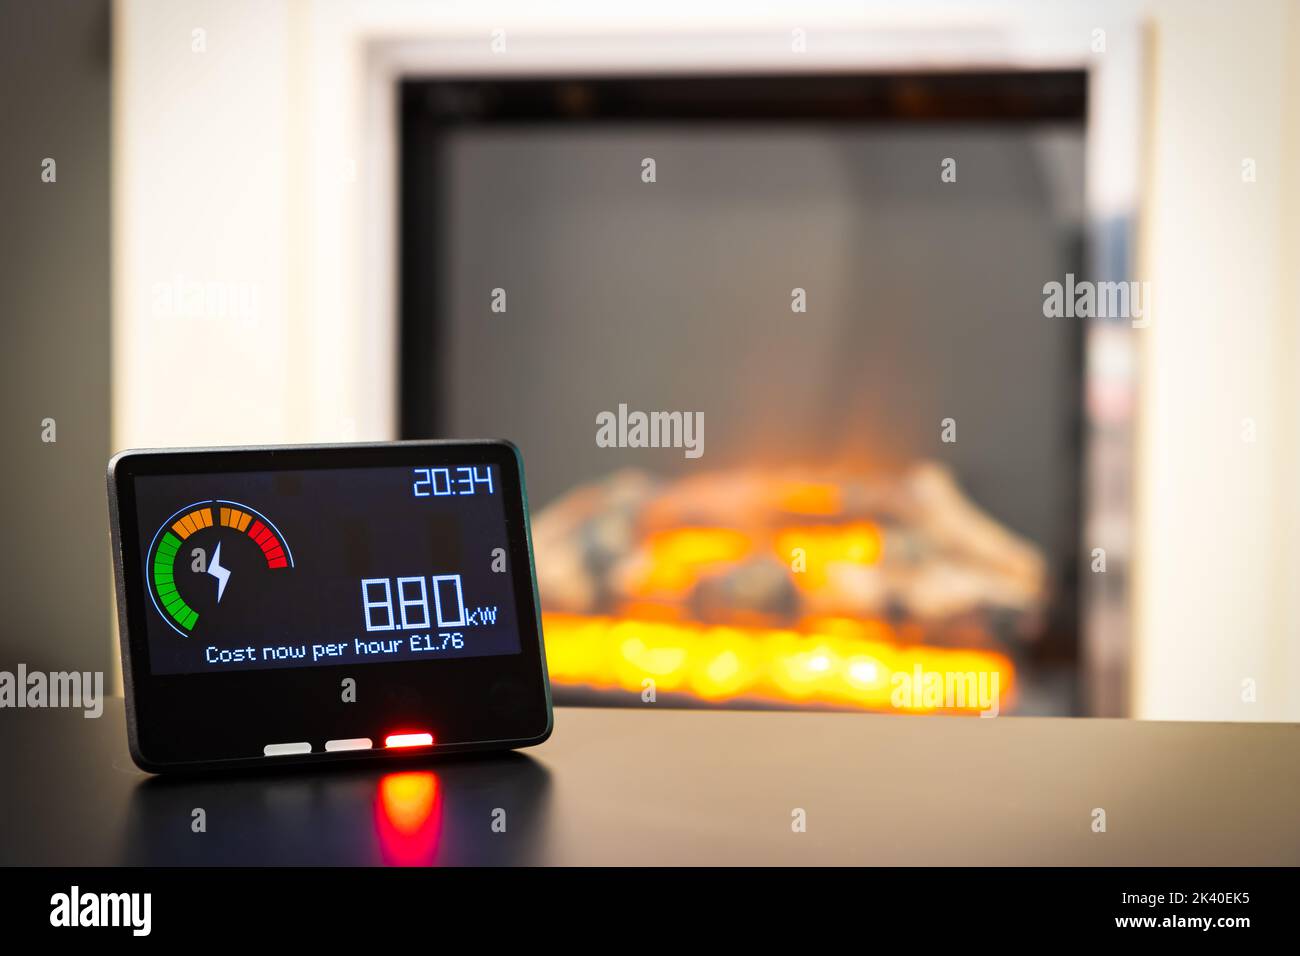 Smart meter showing high energy costs and an electric fire in the background Stock Photo